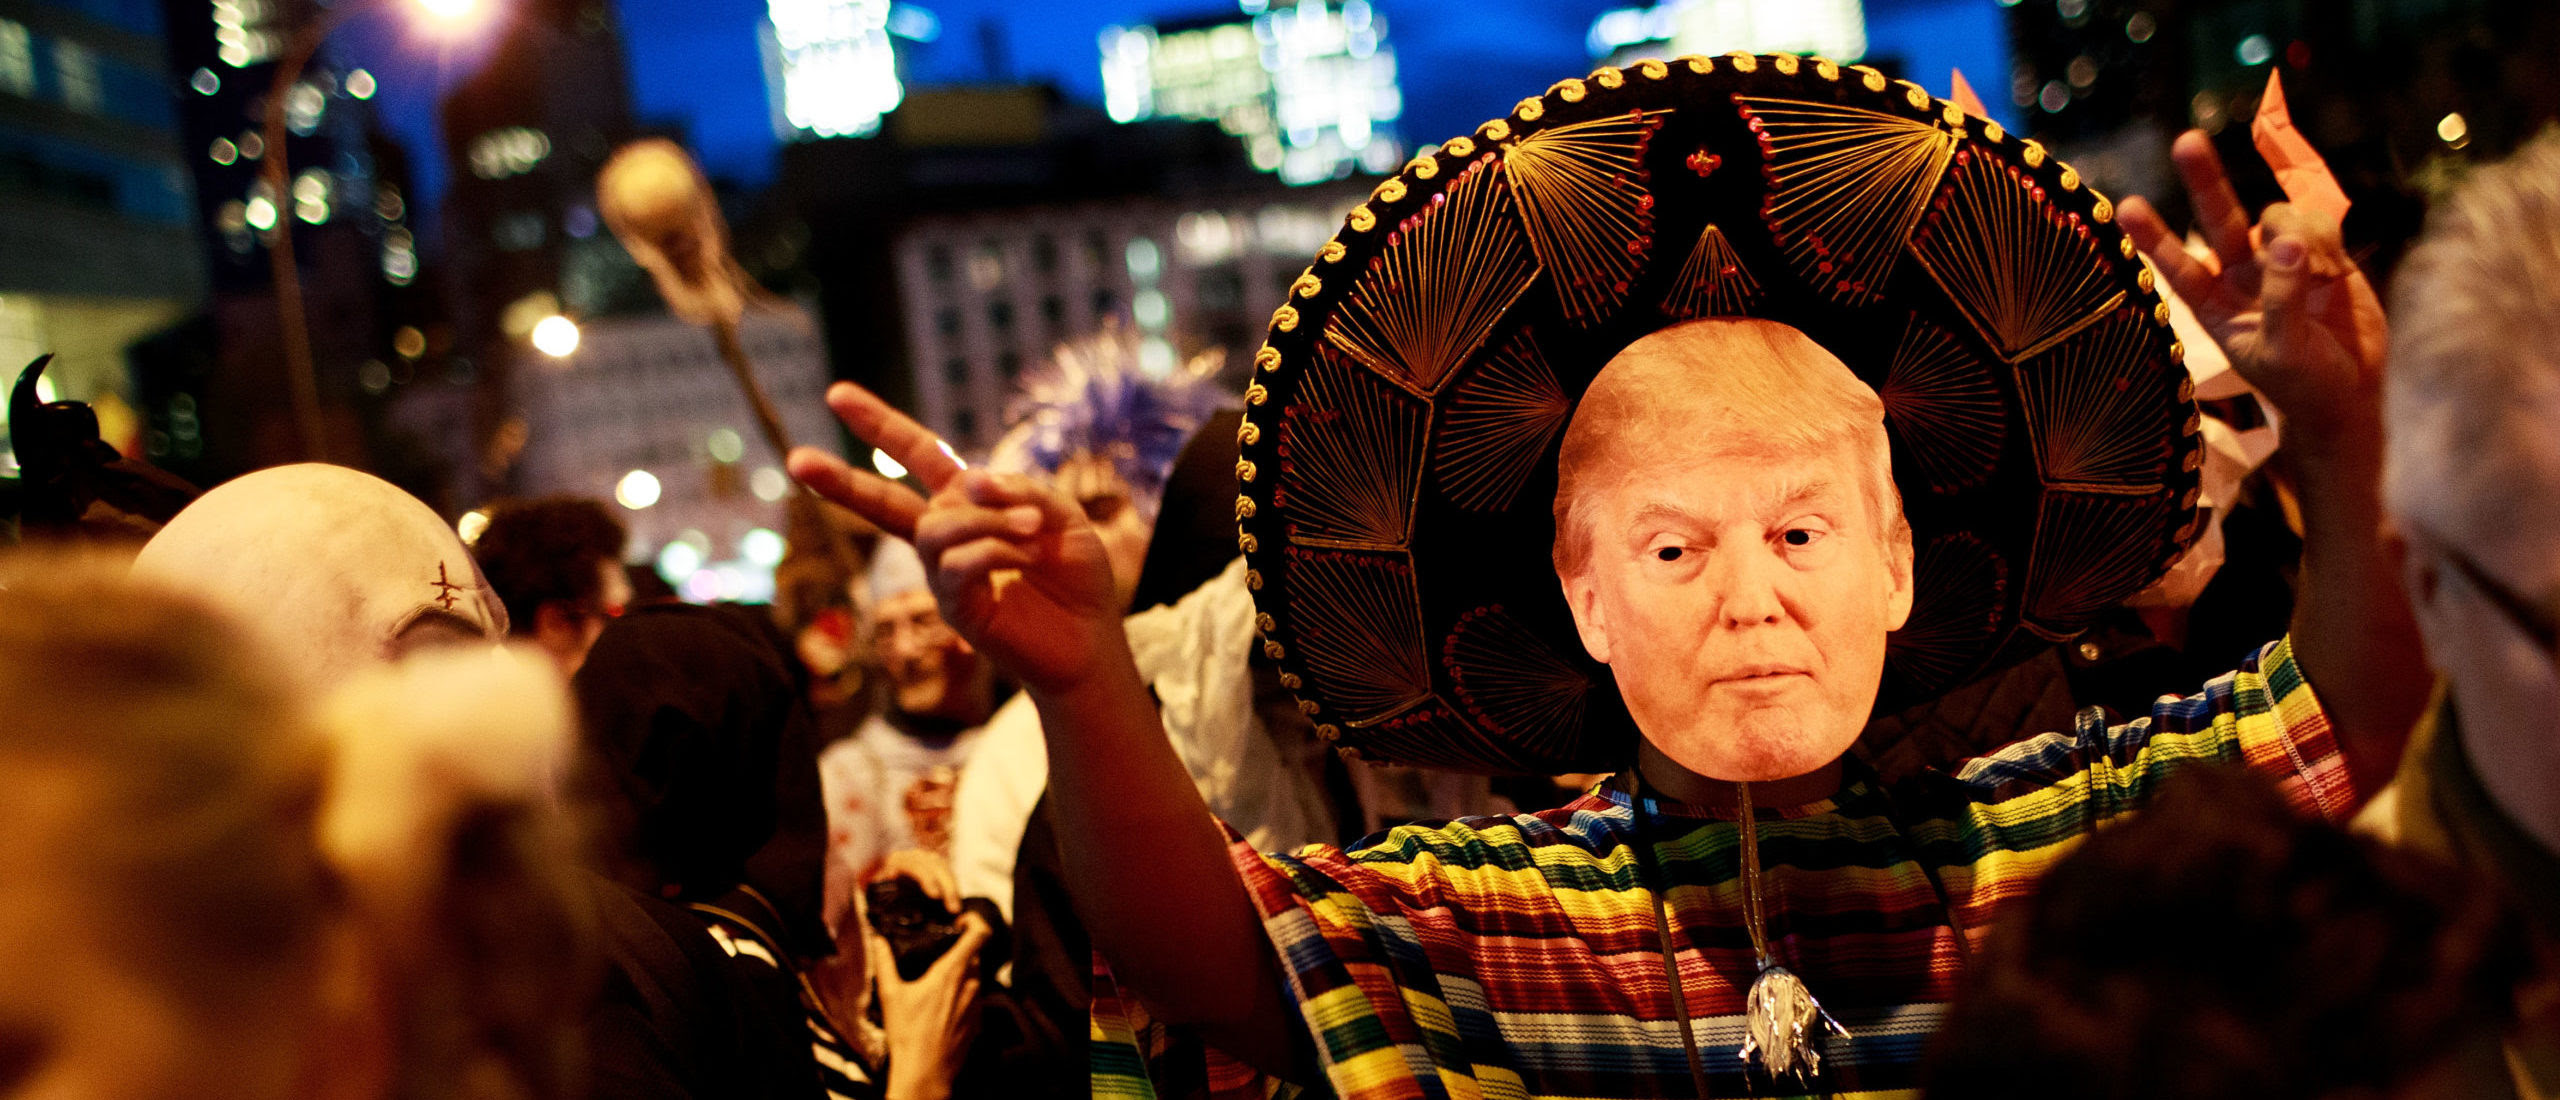 EXCLUSIVE: Poll: White Democrats More Offended Than Hispanics By Sombrero Halloween Costume